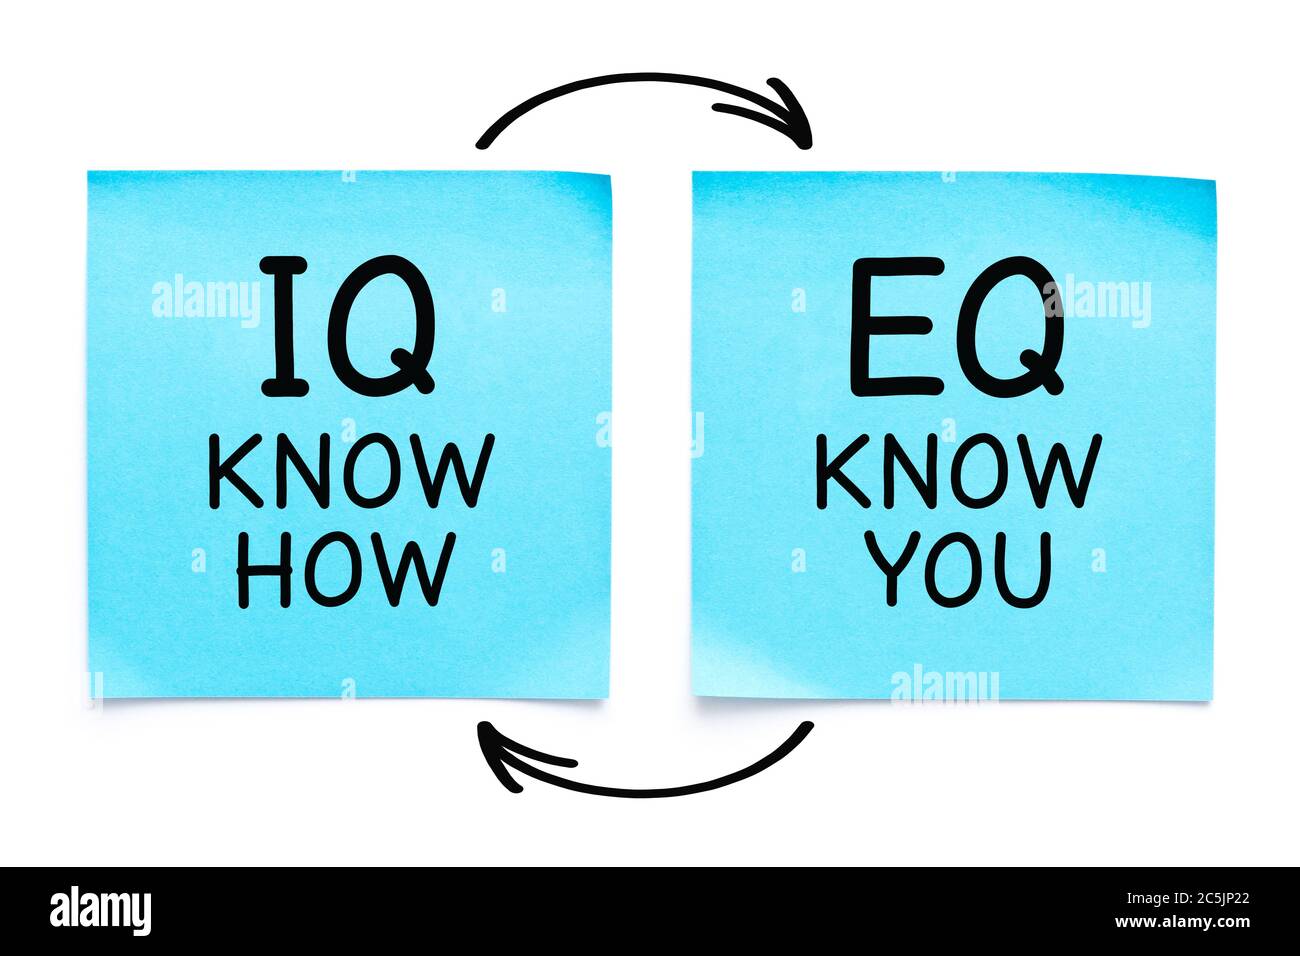 Handwritten IQ Know How and EQ Know You concept on two blue sticky notes isolated on white background. Stock Photo